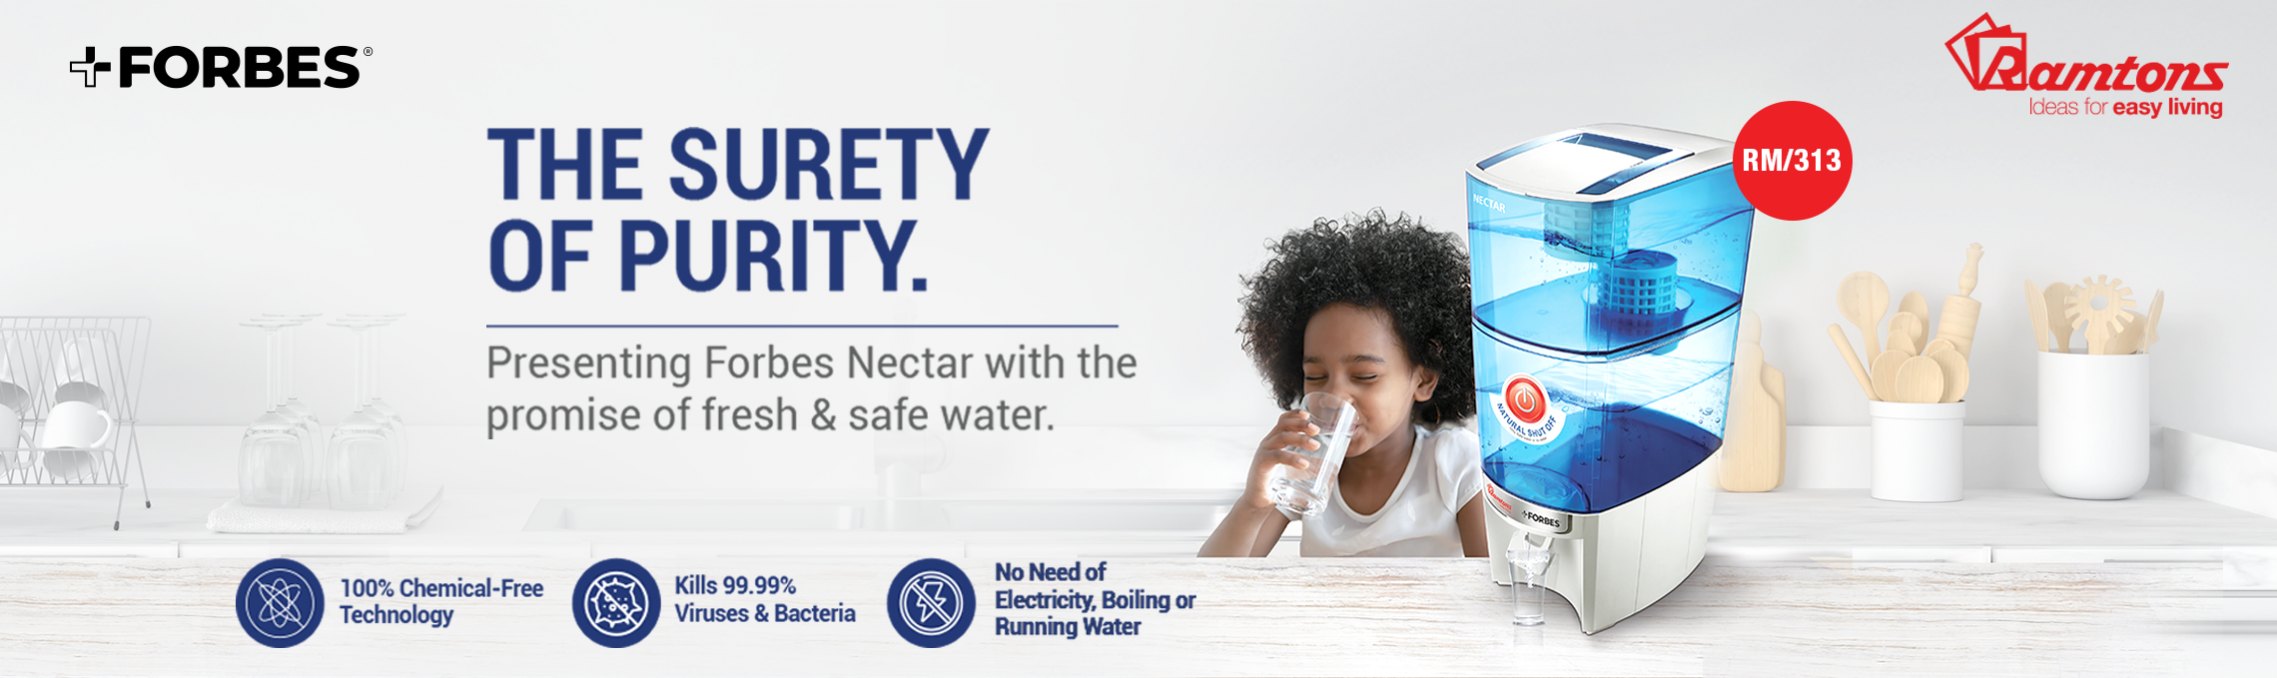 Forbes Nectar 1500 Litres Water Purifier- the Surety of Purity |ramtons